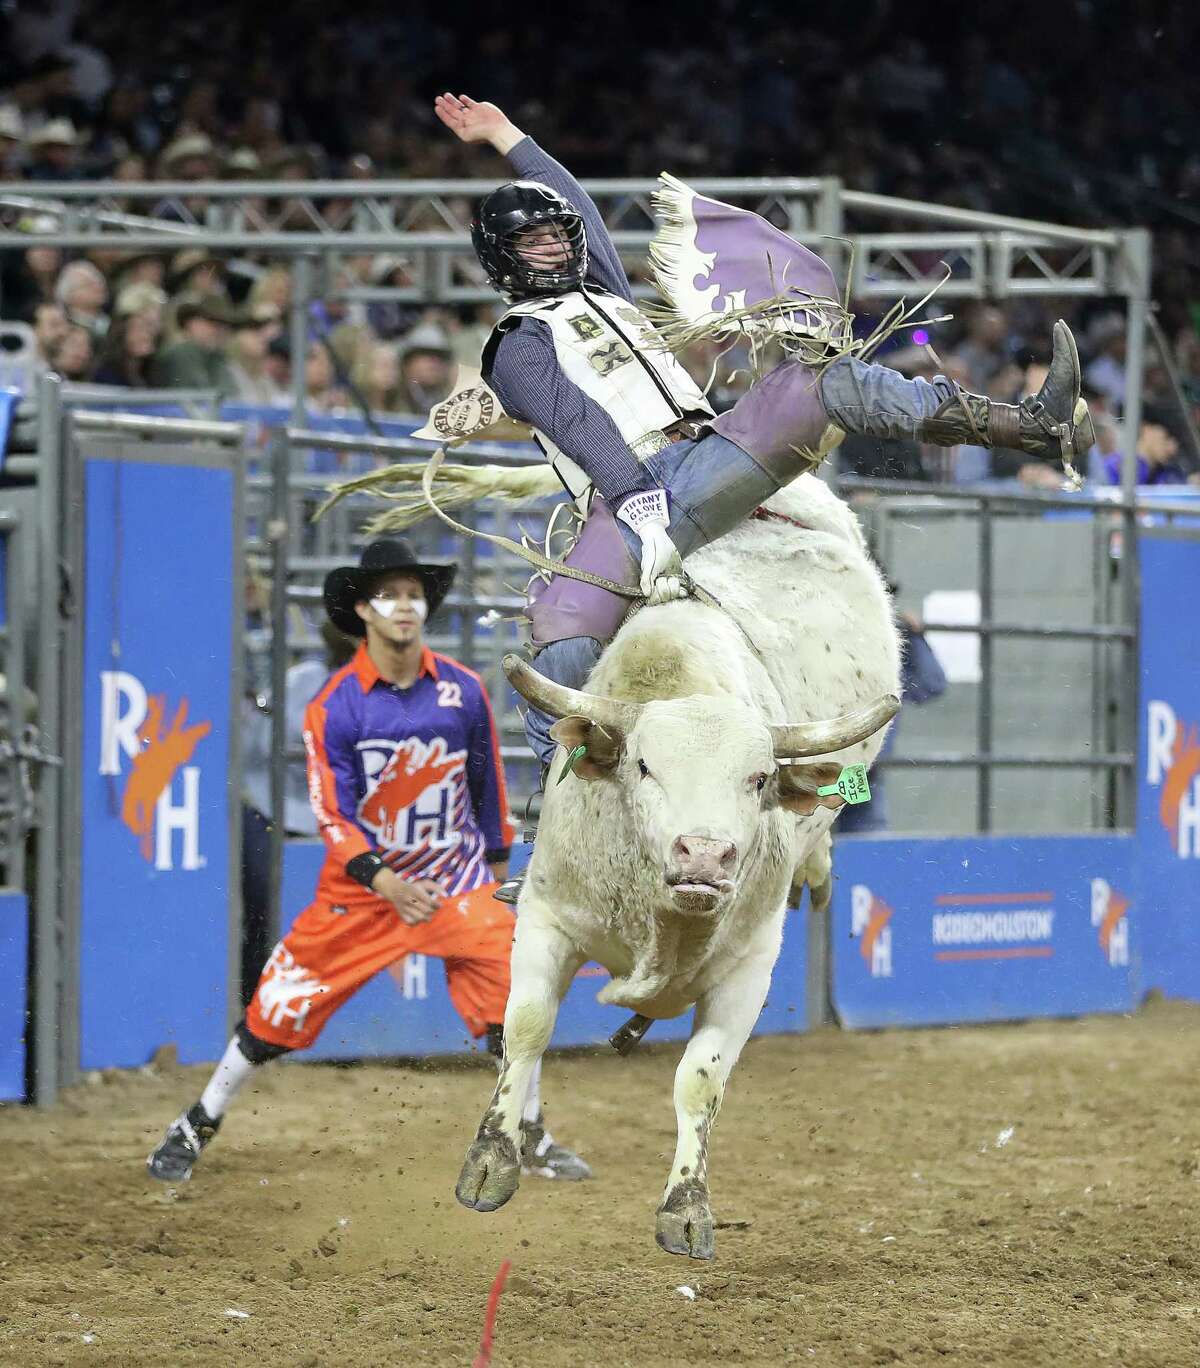 Koby Radley rides Iceman in the Bull Riding competition during round three of Super Series 1 at the Houston Livestock Show and Rodeo at NRG Stadium on Wednesday, March 2, 2022 in Houston.